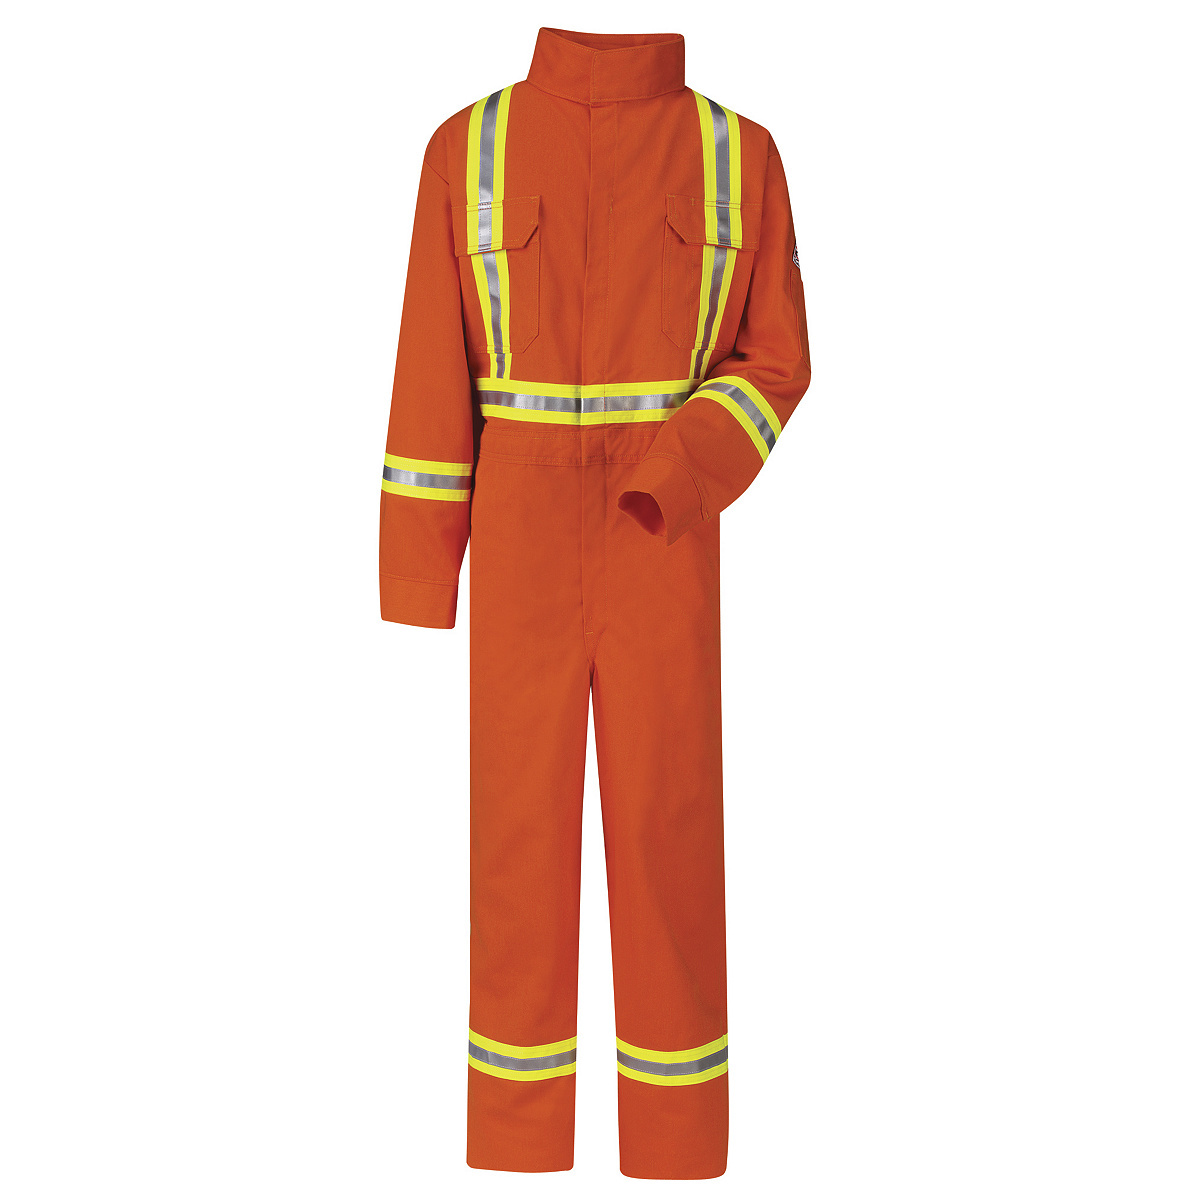 Bulwark® 54 Tall Orange Westex Ultrasoft® Twill/Cotton/Nylon Flame Resistant Coveralls With Zipper Front Closure And Reflective